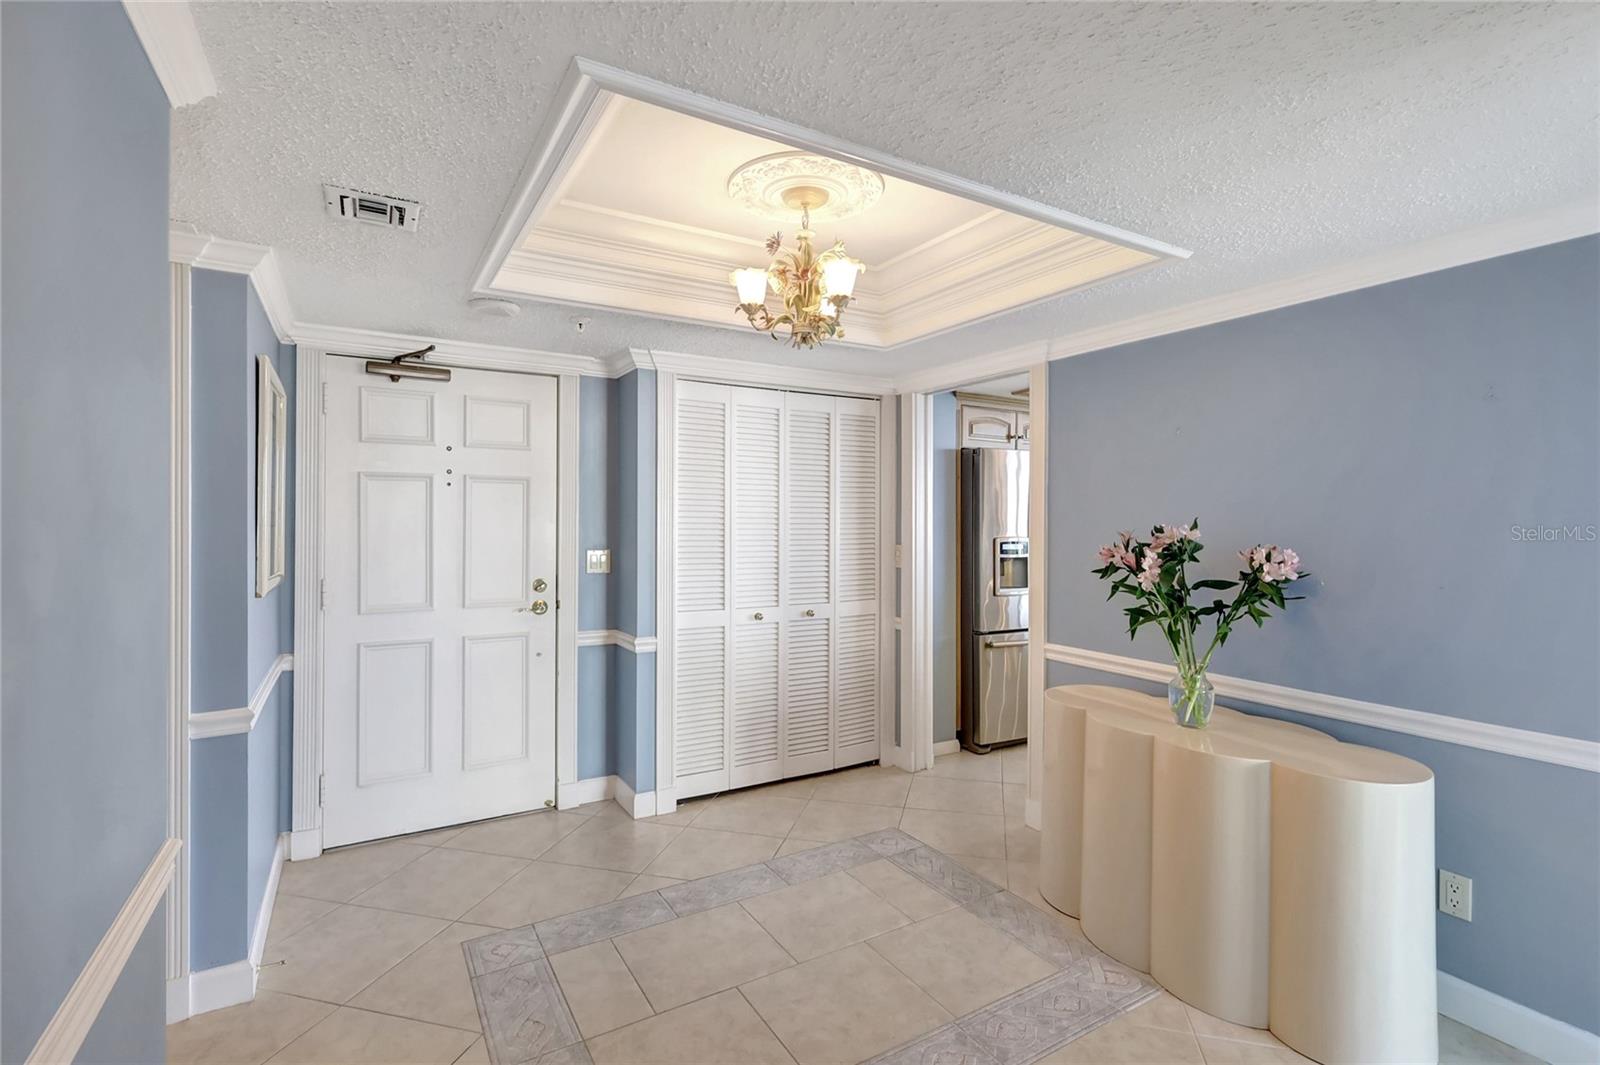 Entry Foyer with Guest Closet, custom coffered ceiling & chair rail.